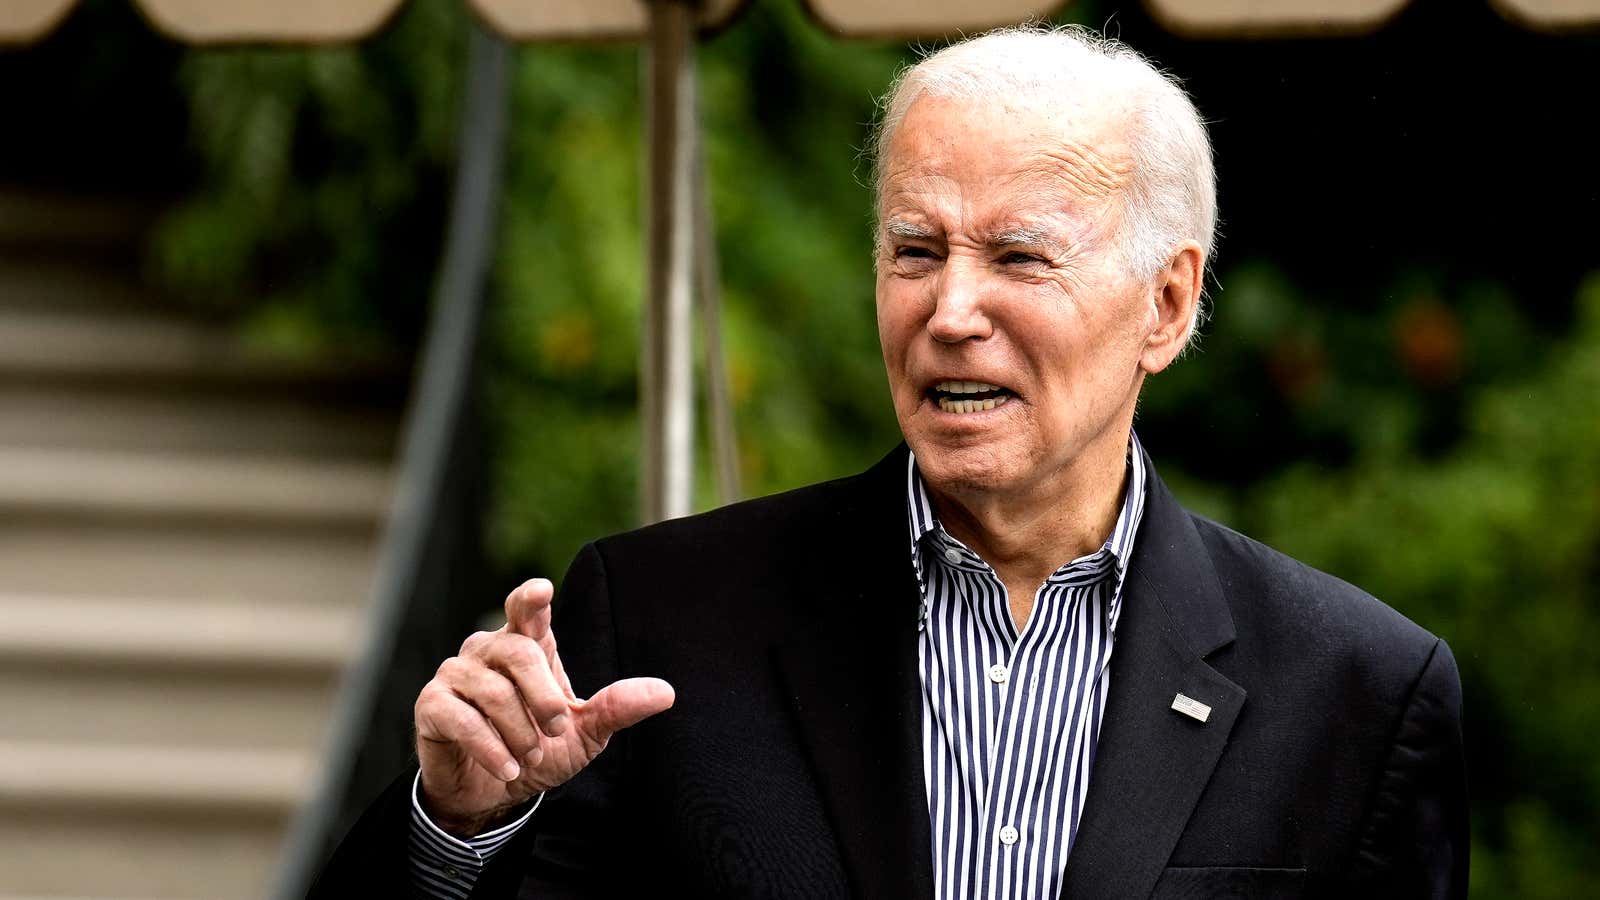 Okay, Don’t Tell Anyone I Told You This, But I Have A Friend Who Works At The White House And She Said That Biden’s Literally Not Nice In Real Life At All